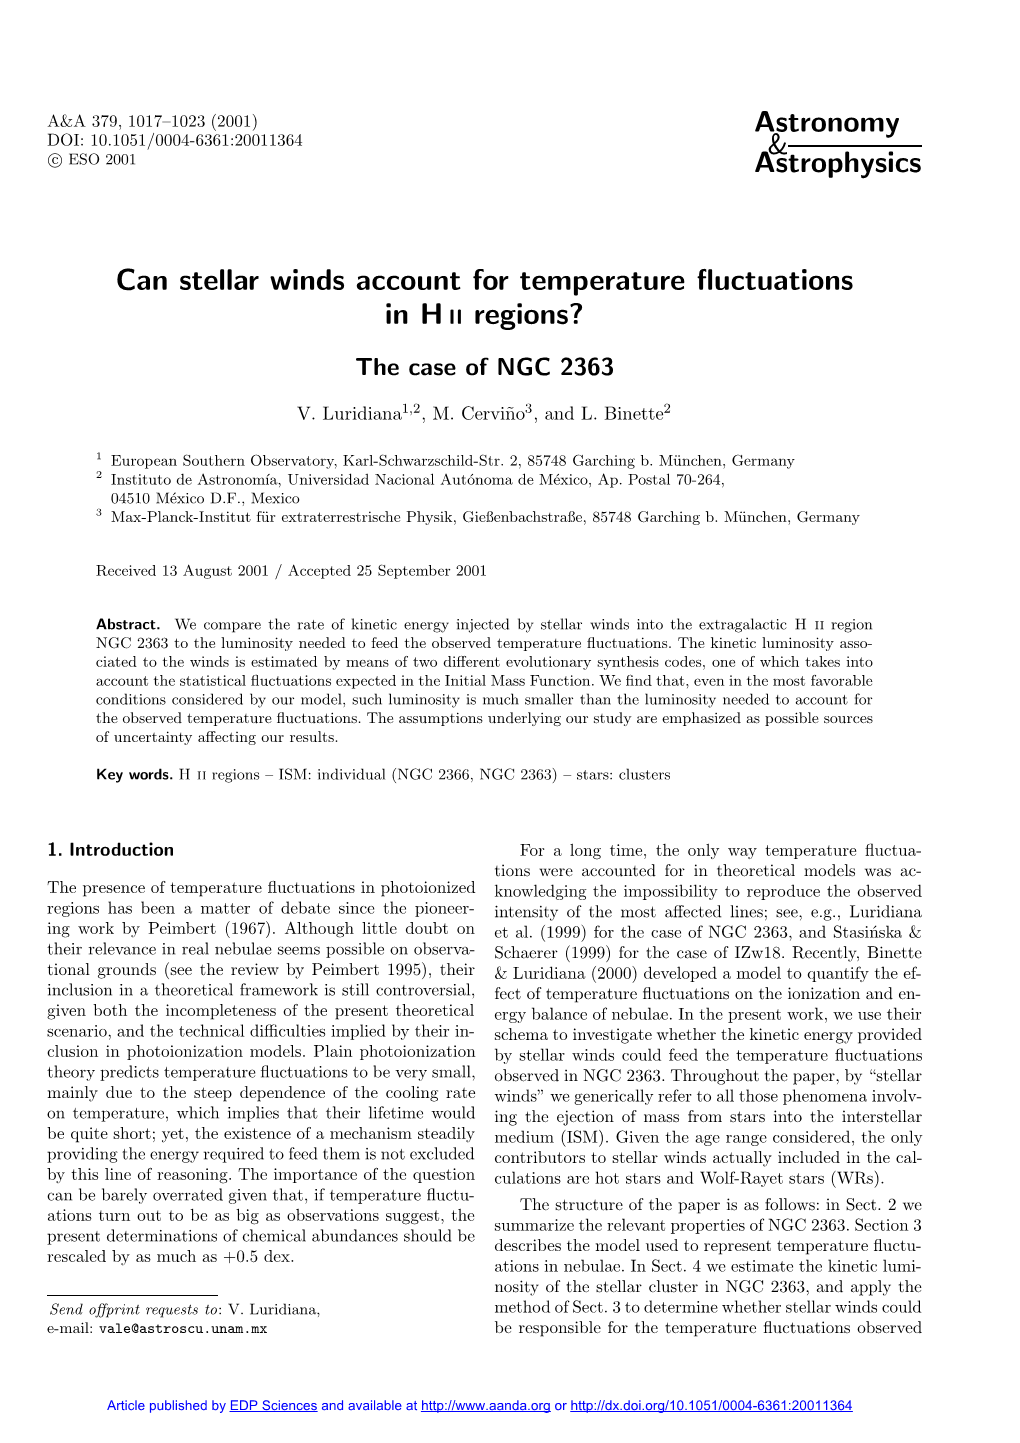 Can Stellar Winds Account for Temperature Fluctuations in H II